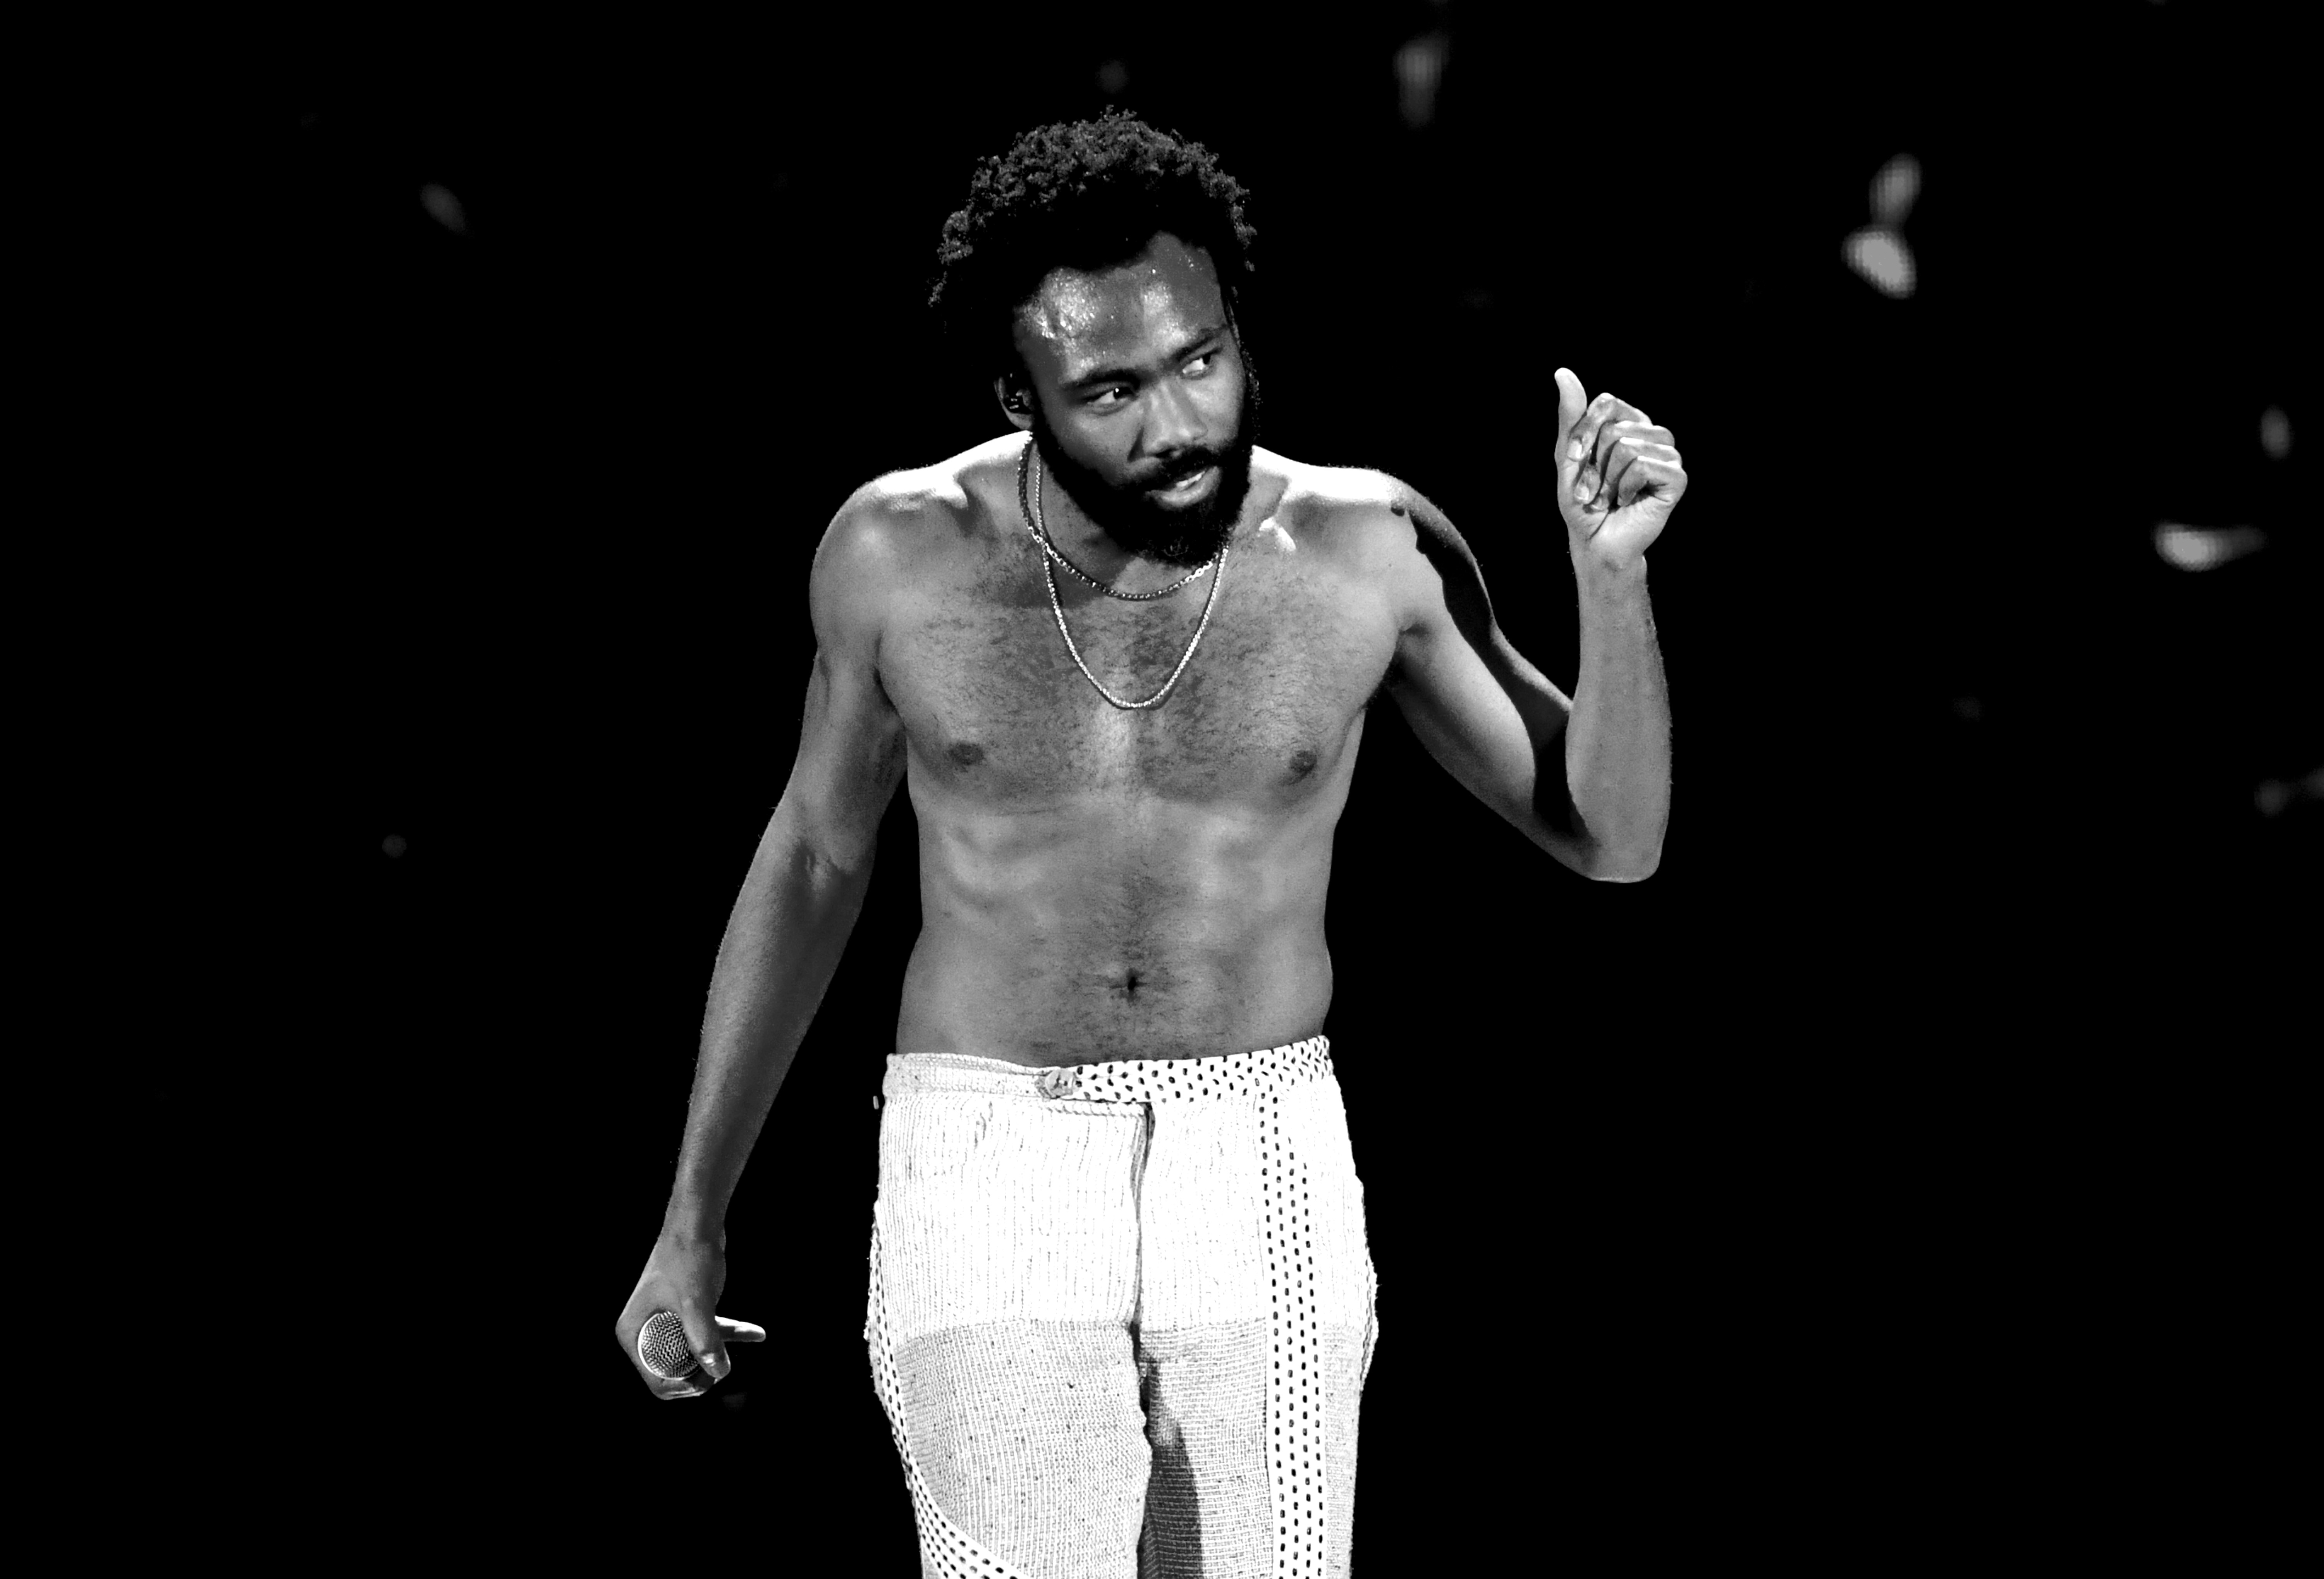 Childish Gambino’s “This Is America” Tour Proves His Endless Talent & Creativity